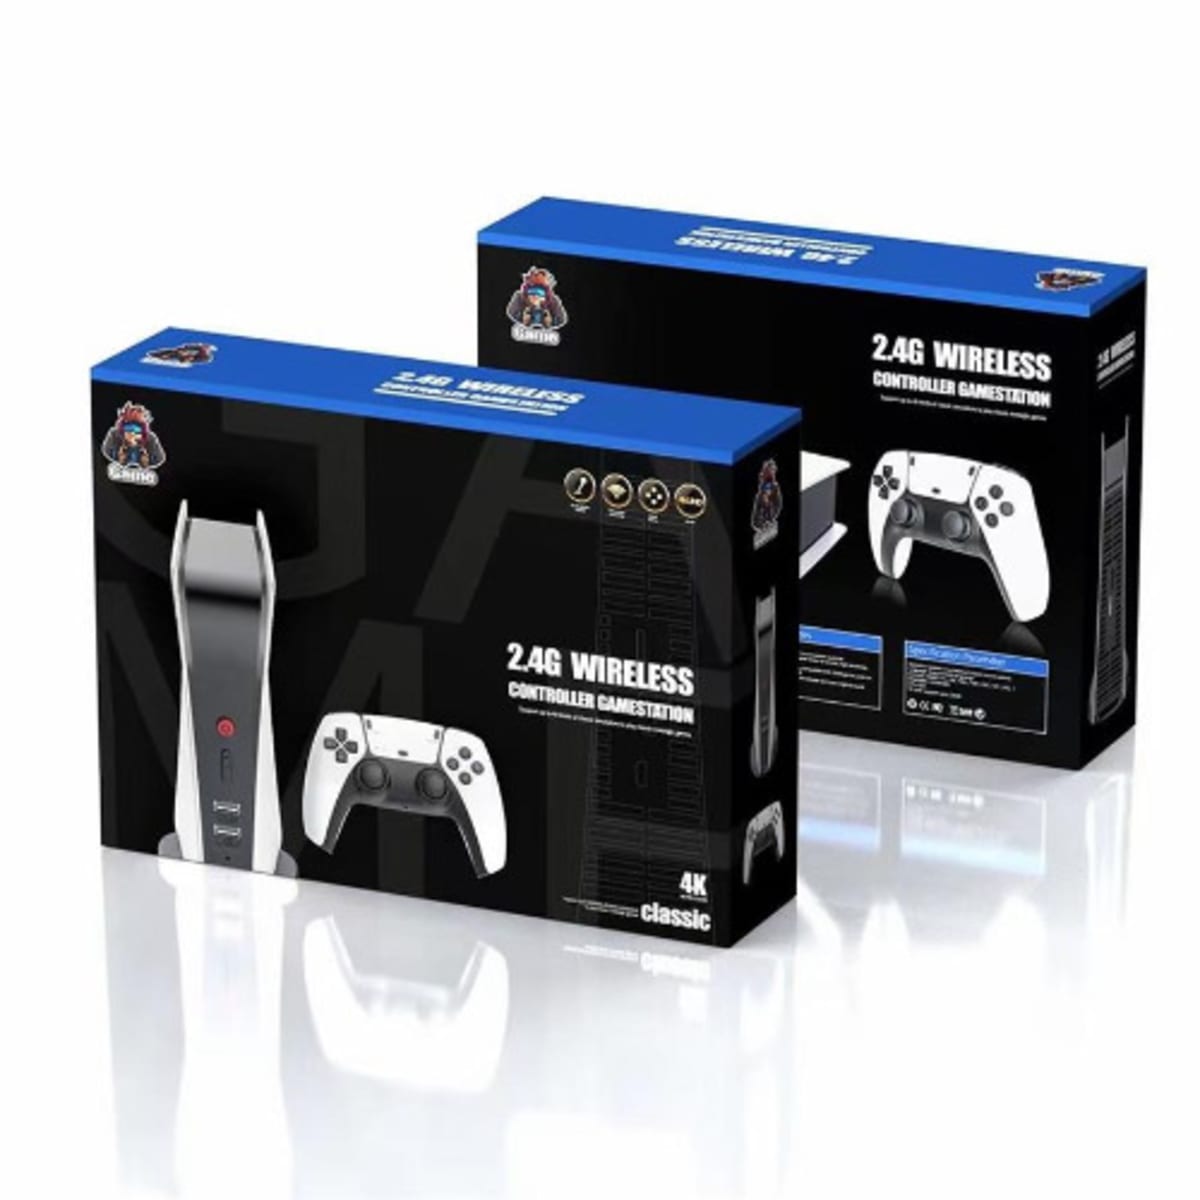 Game 2.4g Double Wireless Controller Game Stick 4k Hd Classic